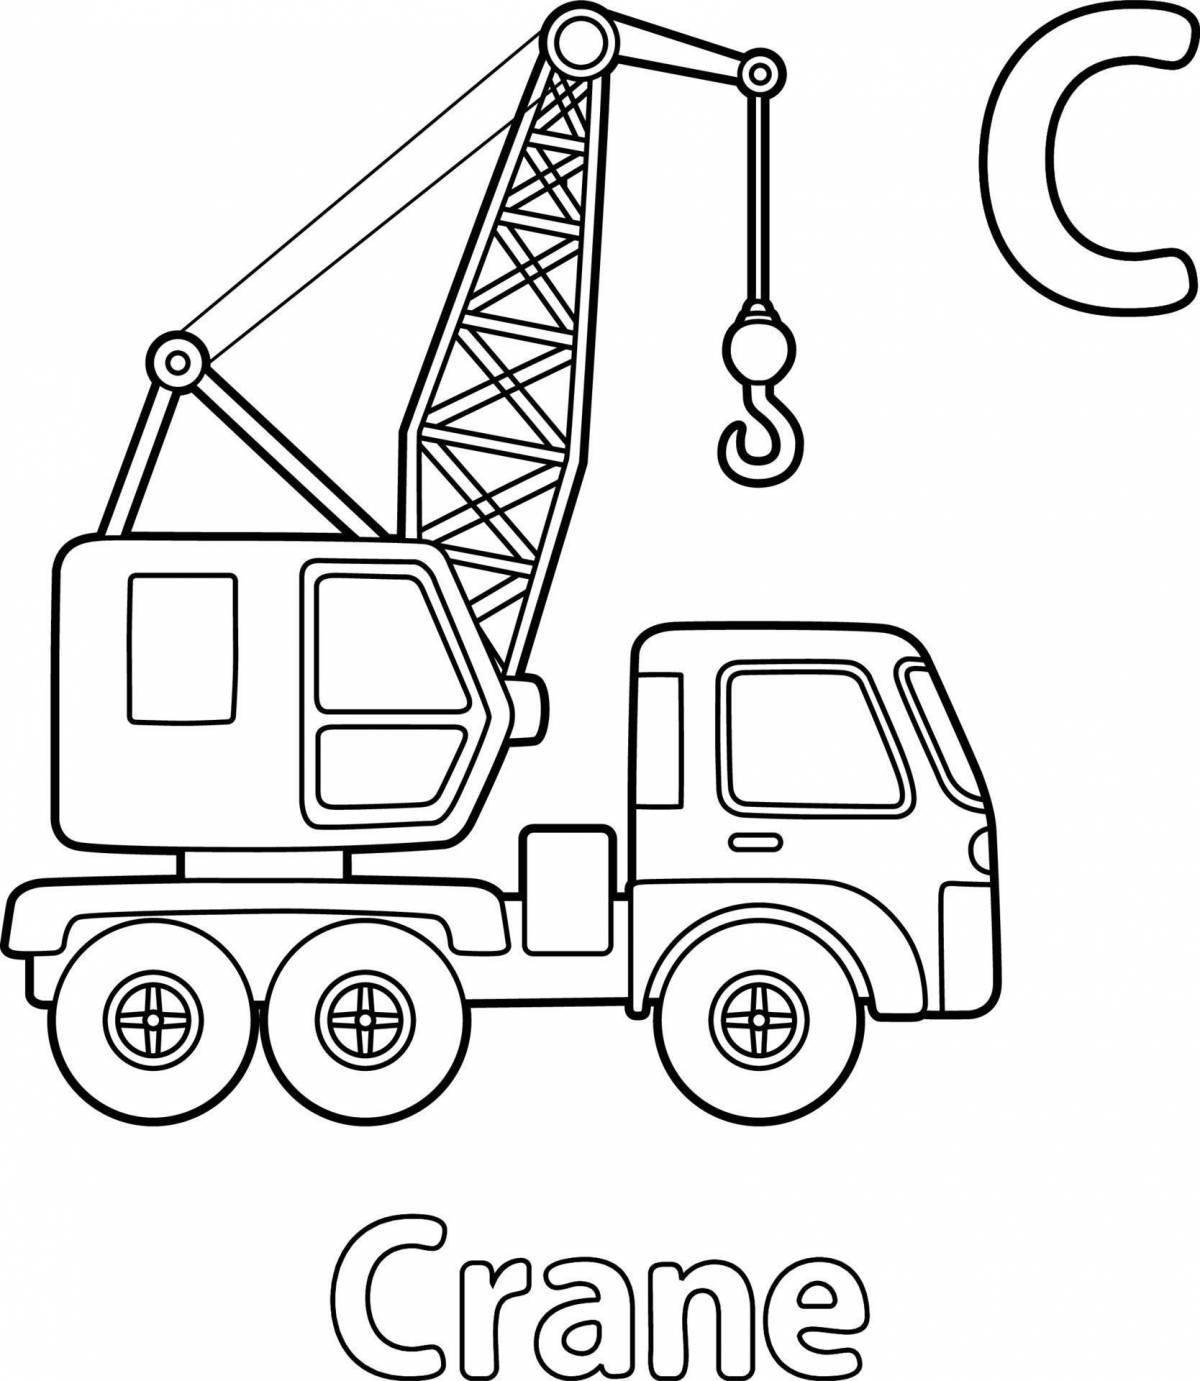 Colorful crane coloring page for kids